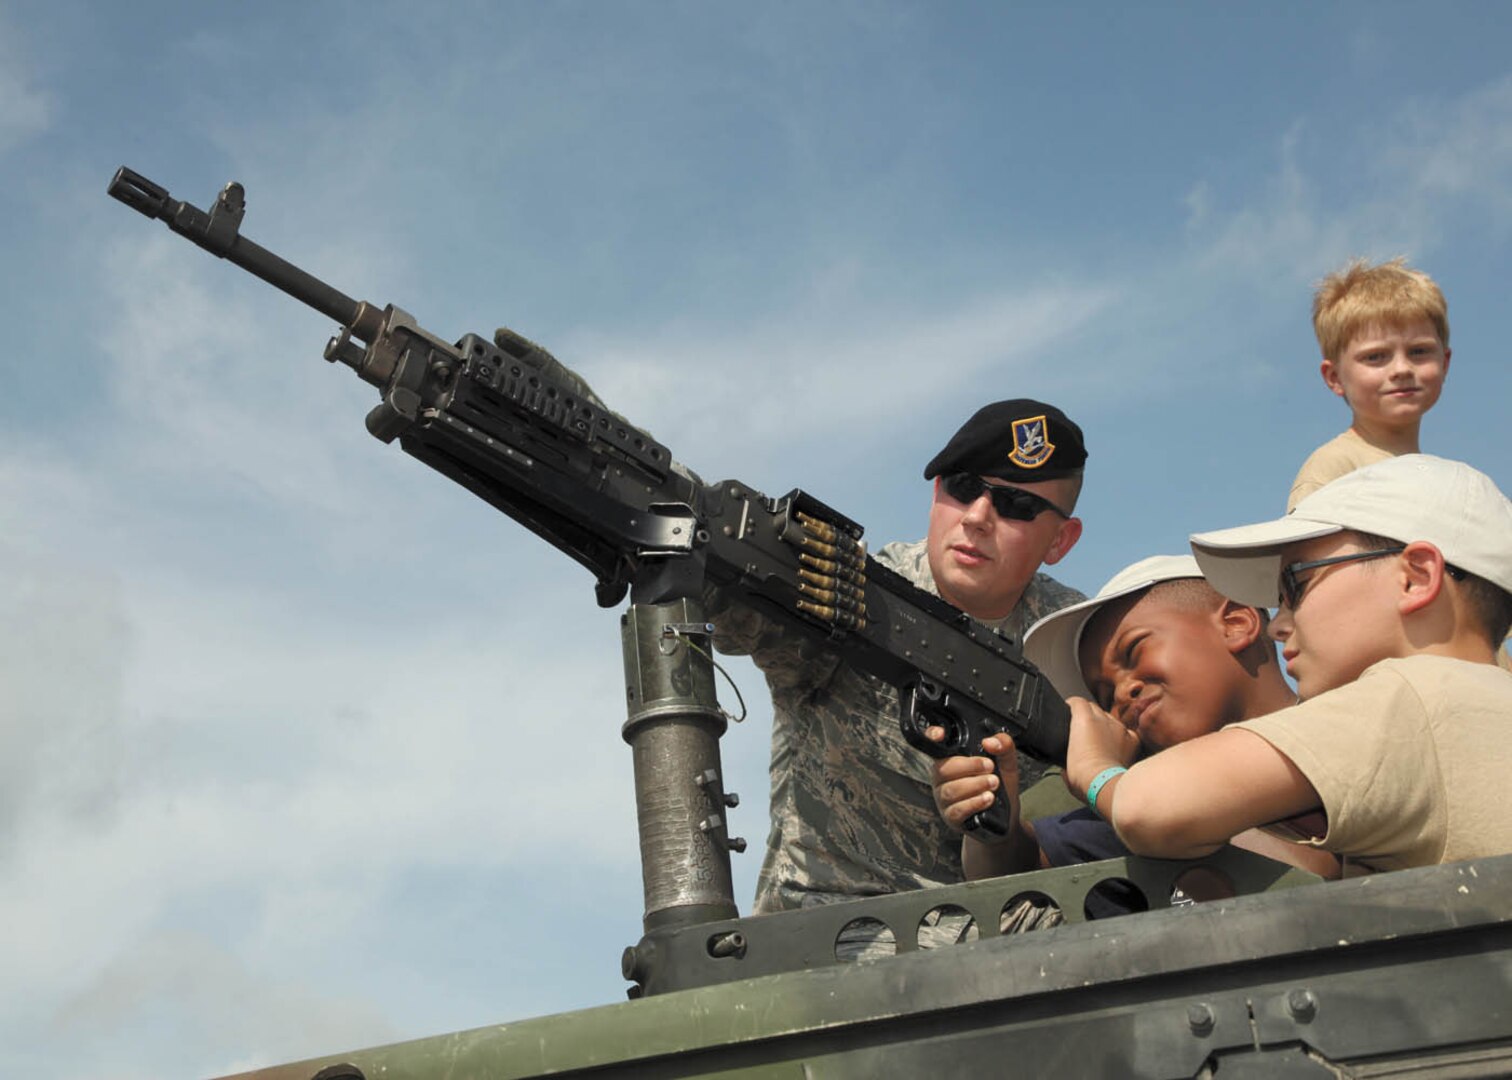 Tech Sgt. Douglas Reed, heavy weapons instructor with the 343rd Training Squadron, allows Zane Oden, son of retired Navy seaman Stanley Oden, and Nathaniel Schaffer, son of Tech. Sgt. Tiffany Schaffer, to take hold of the M240 machine gun. (U.S. Air Force photo/Robbin Cresswell)